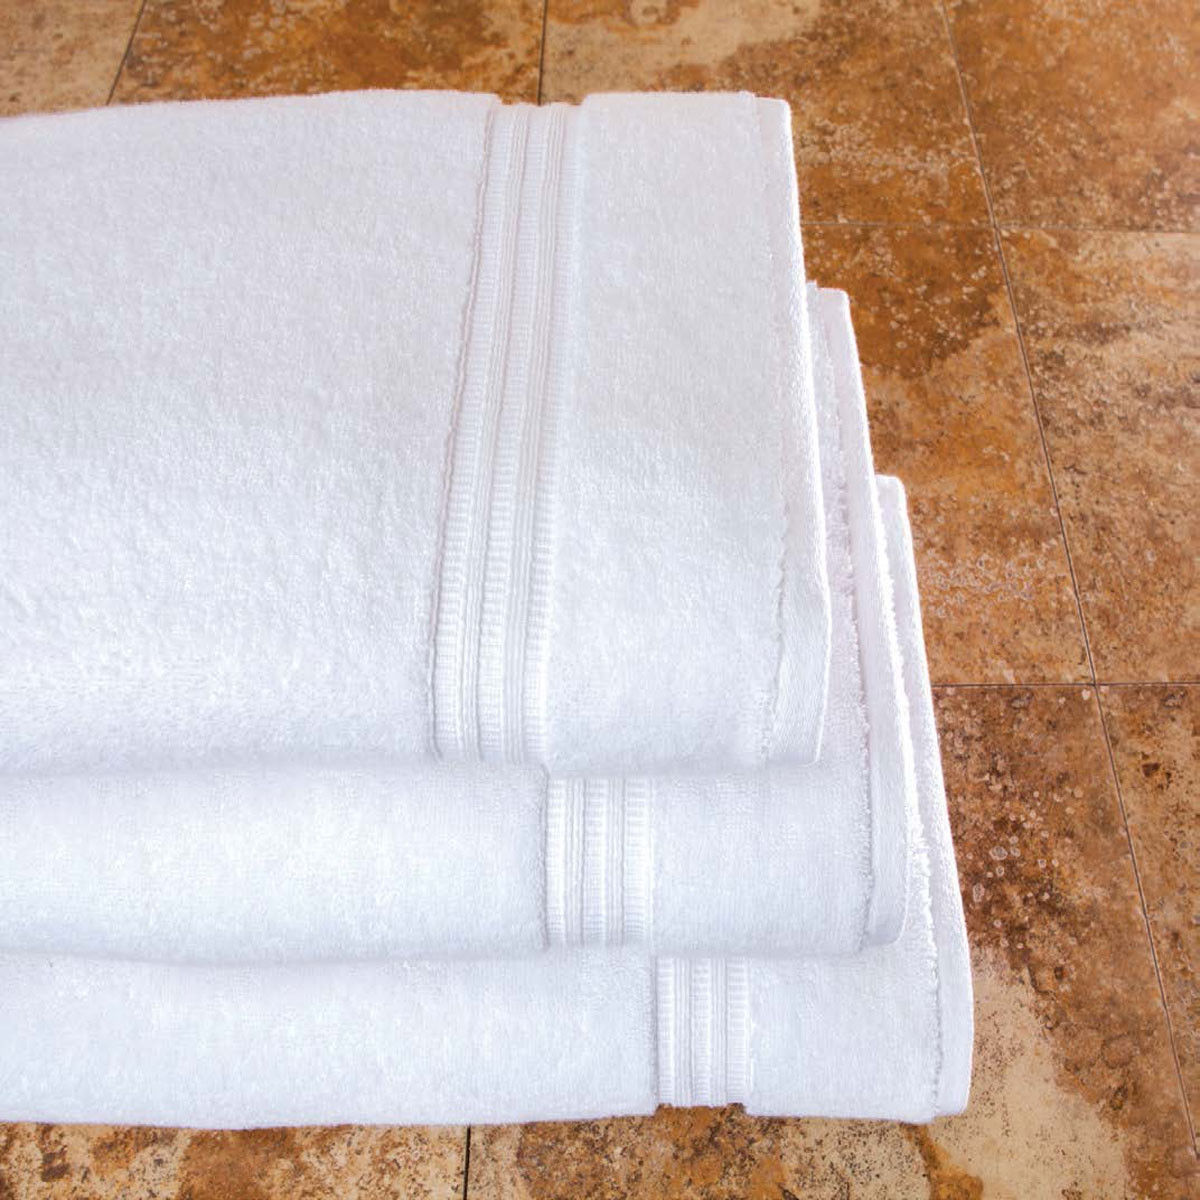 Where can I find all of your luxury bath towels wholesale?